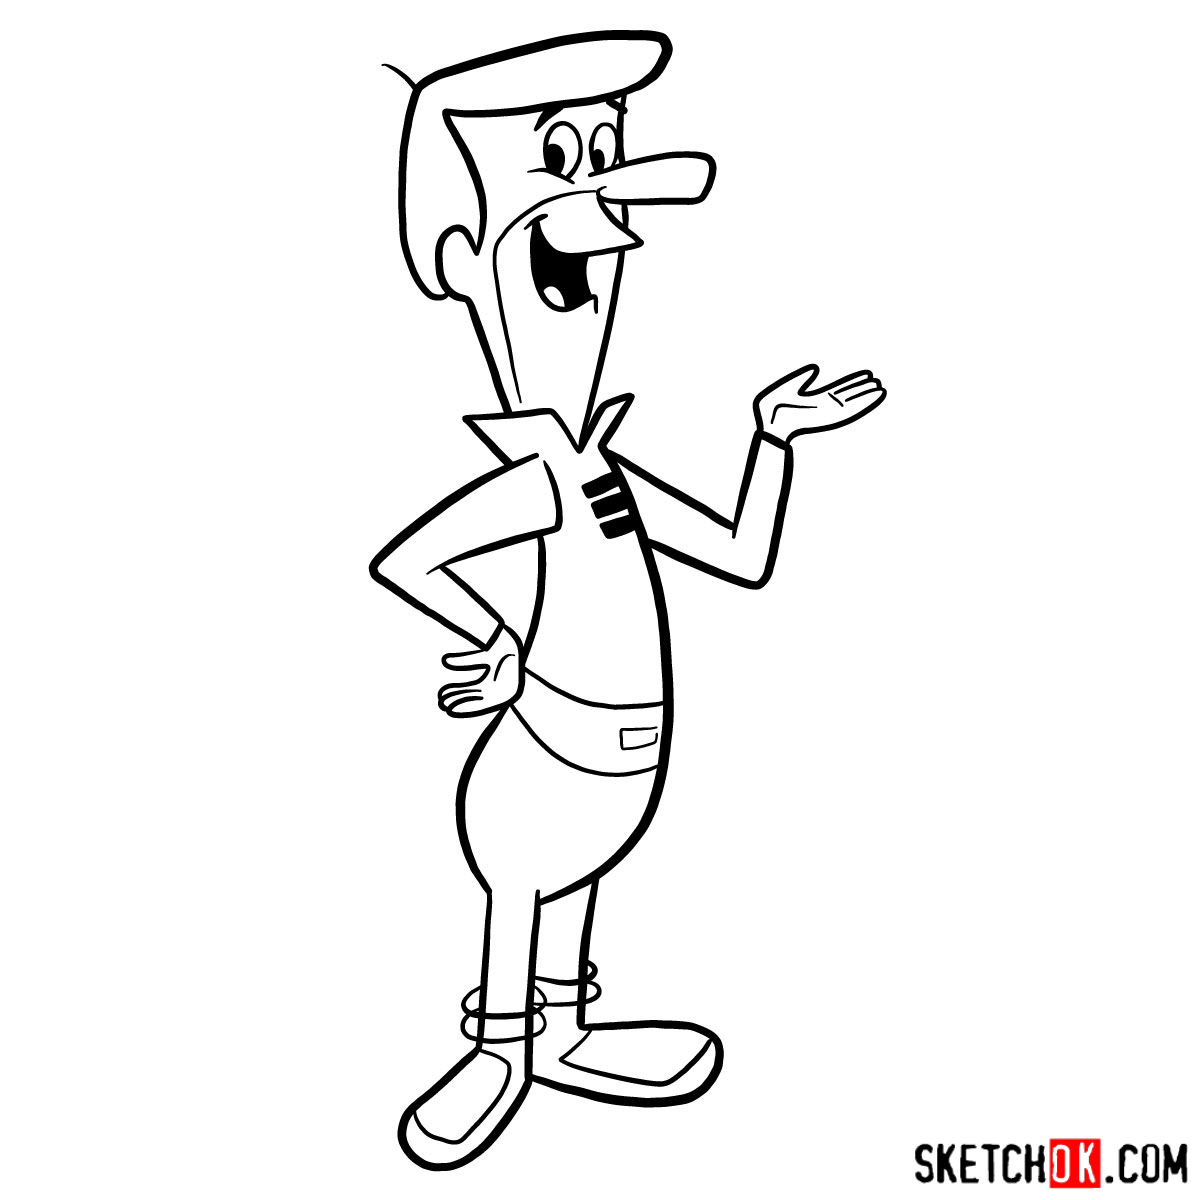 How to draw George Jetson - step 11